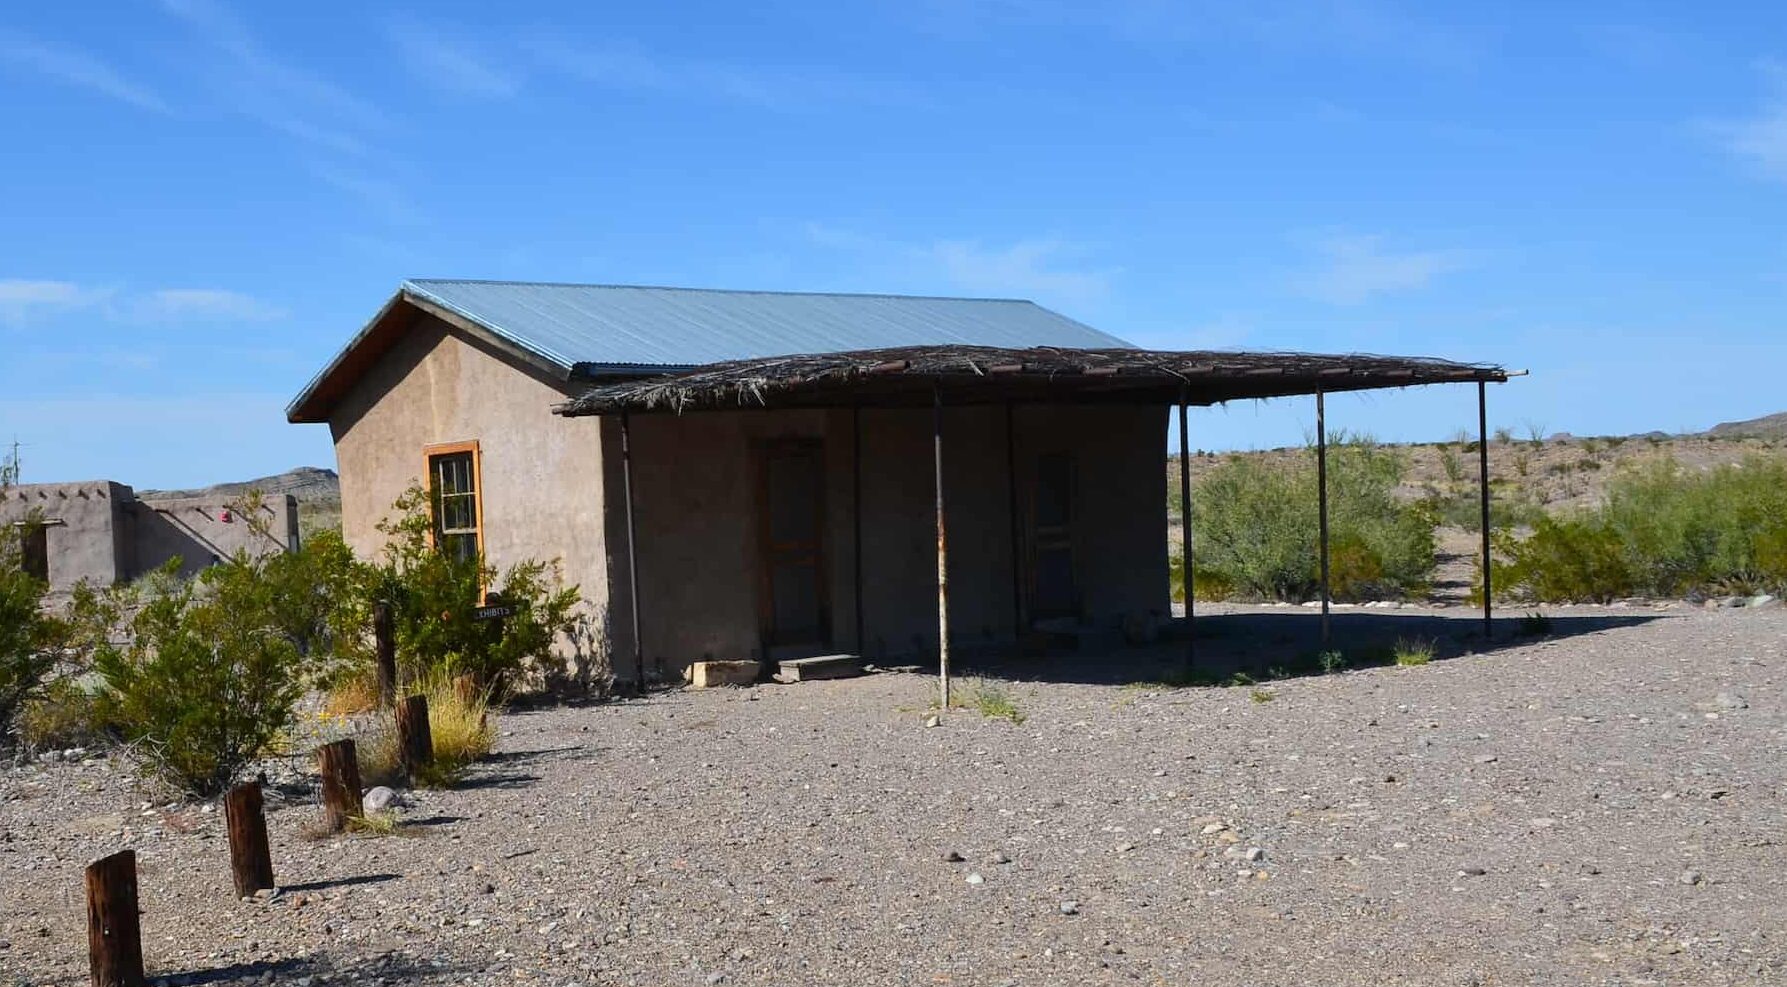 Magdalena House at Castolon in Big Bend National Park in Texas